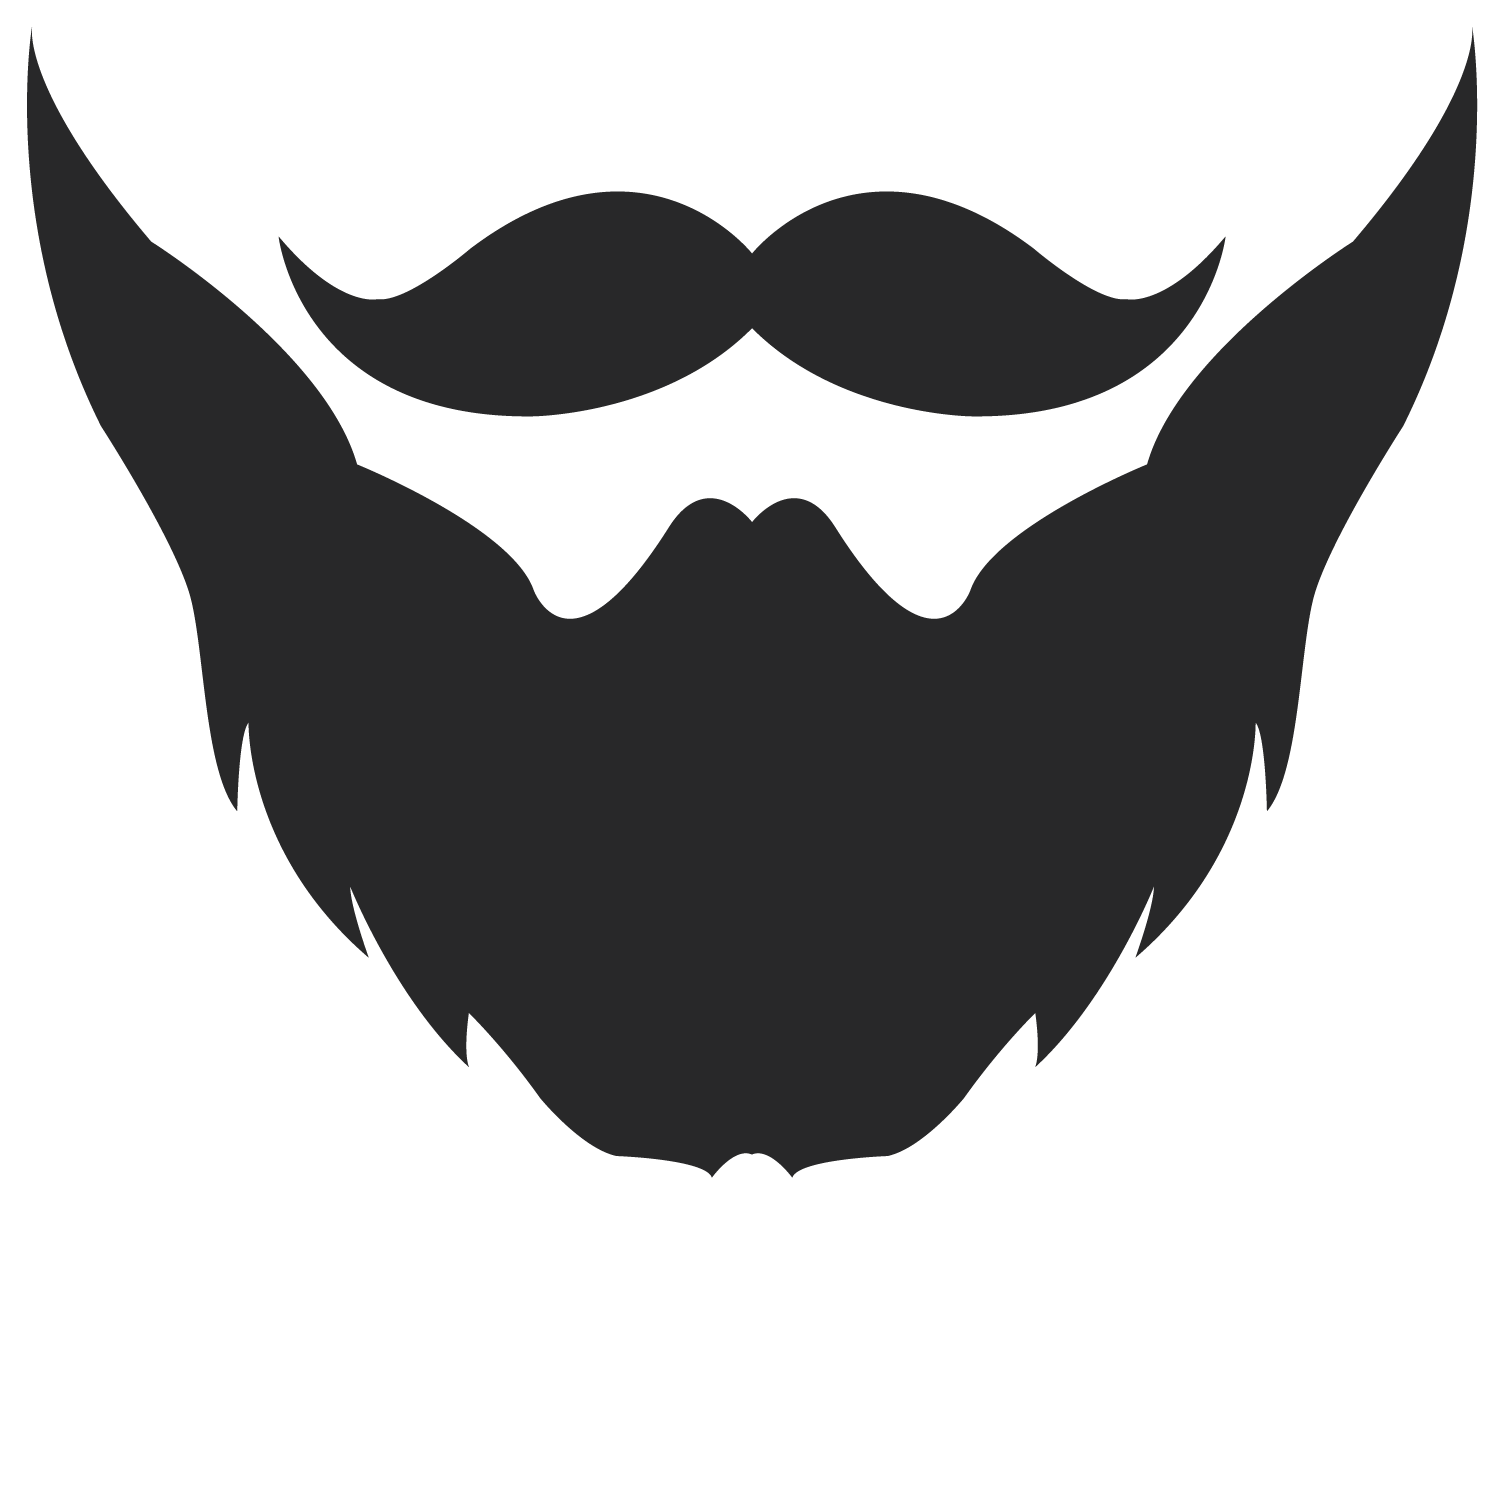 Free Beard Transparent Background Download Free Clip Art Free Clip Art On Clipart Library